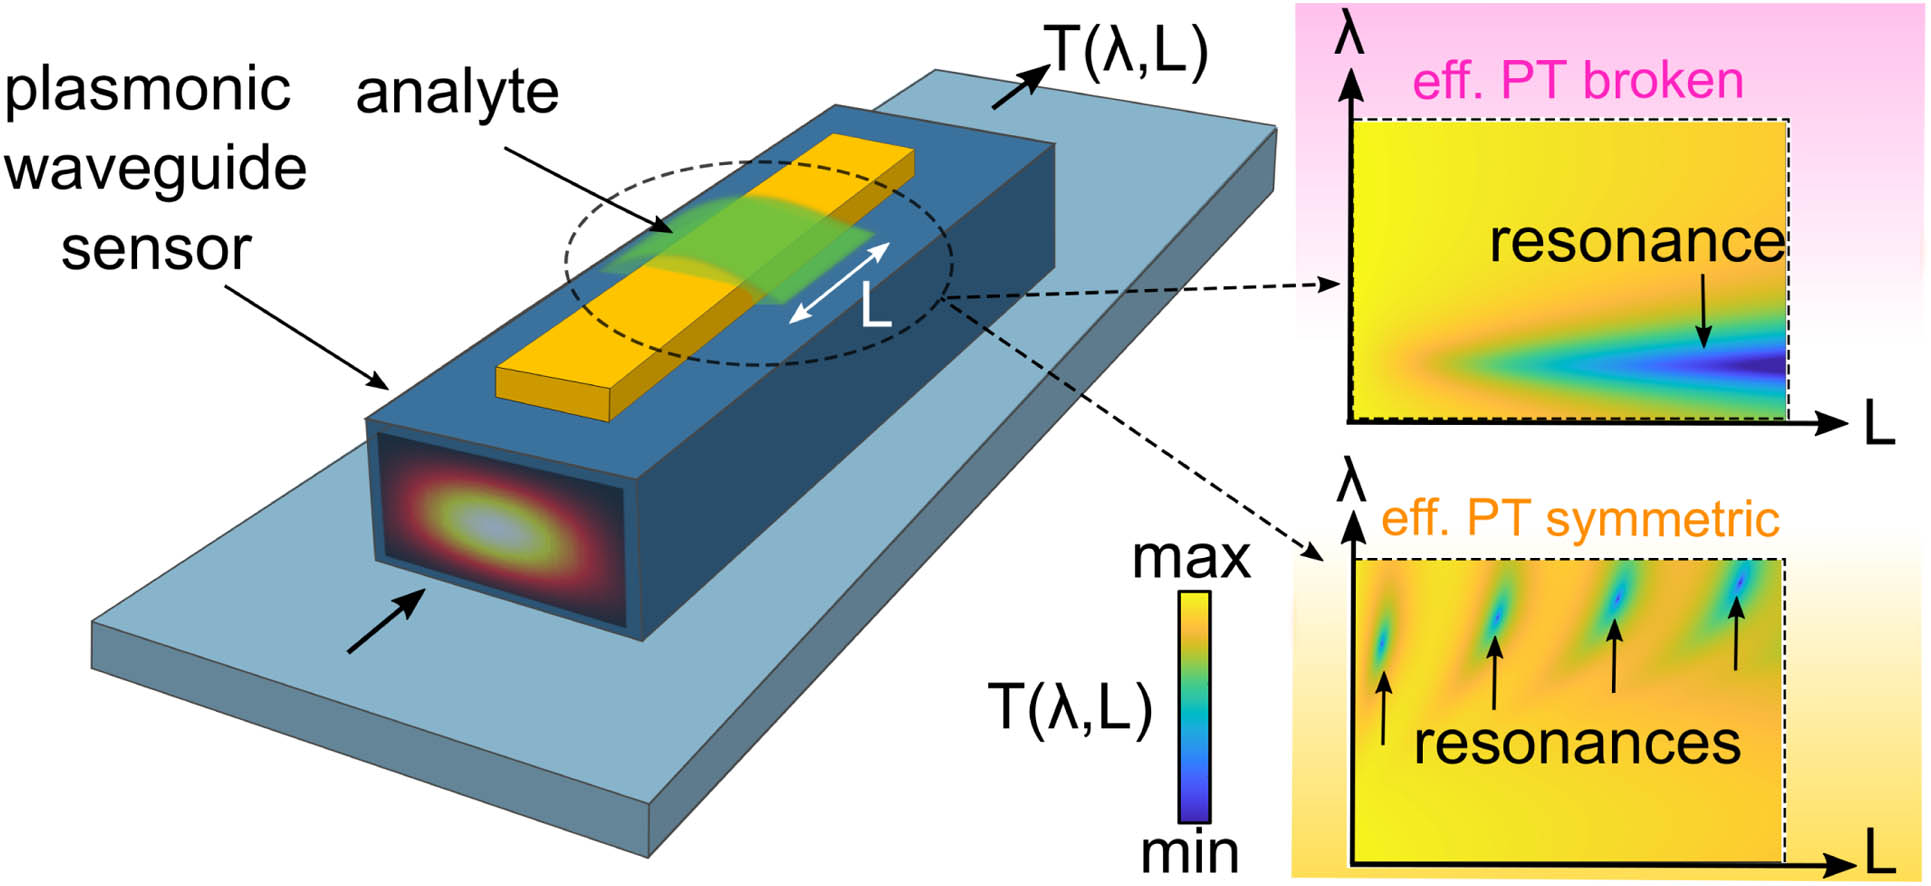 Concept schematic overview of the present study. A plasmonic waveguide sensor can be used to identify change in the refractive index of an analyte (blue: dielectric; yellow: metal; green: analyte; interaction length: L) by coupling to a mode at the input and measuring the transmission spectrum T at the output. Note that the resonant transmission is a function of both wavelength λ and length L and can present remarkably different characteristics depending on whether the system is in the EPTS or EPTB regime [18], each unlocked by changing the refractive index of the analyte.